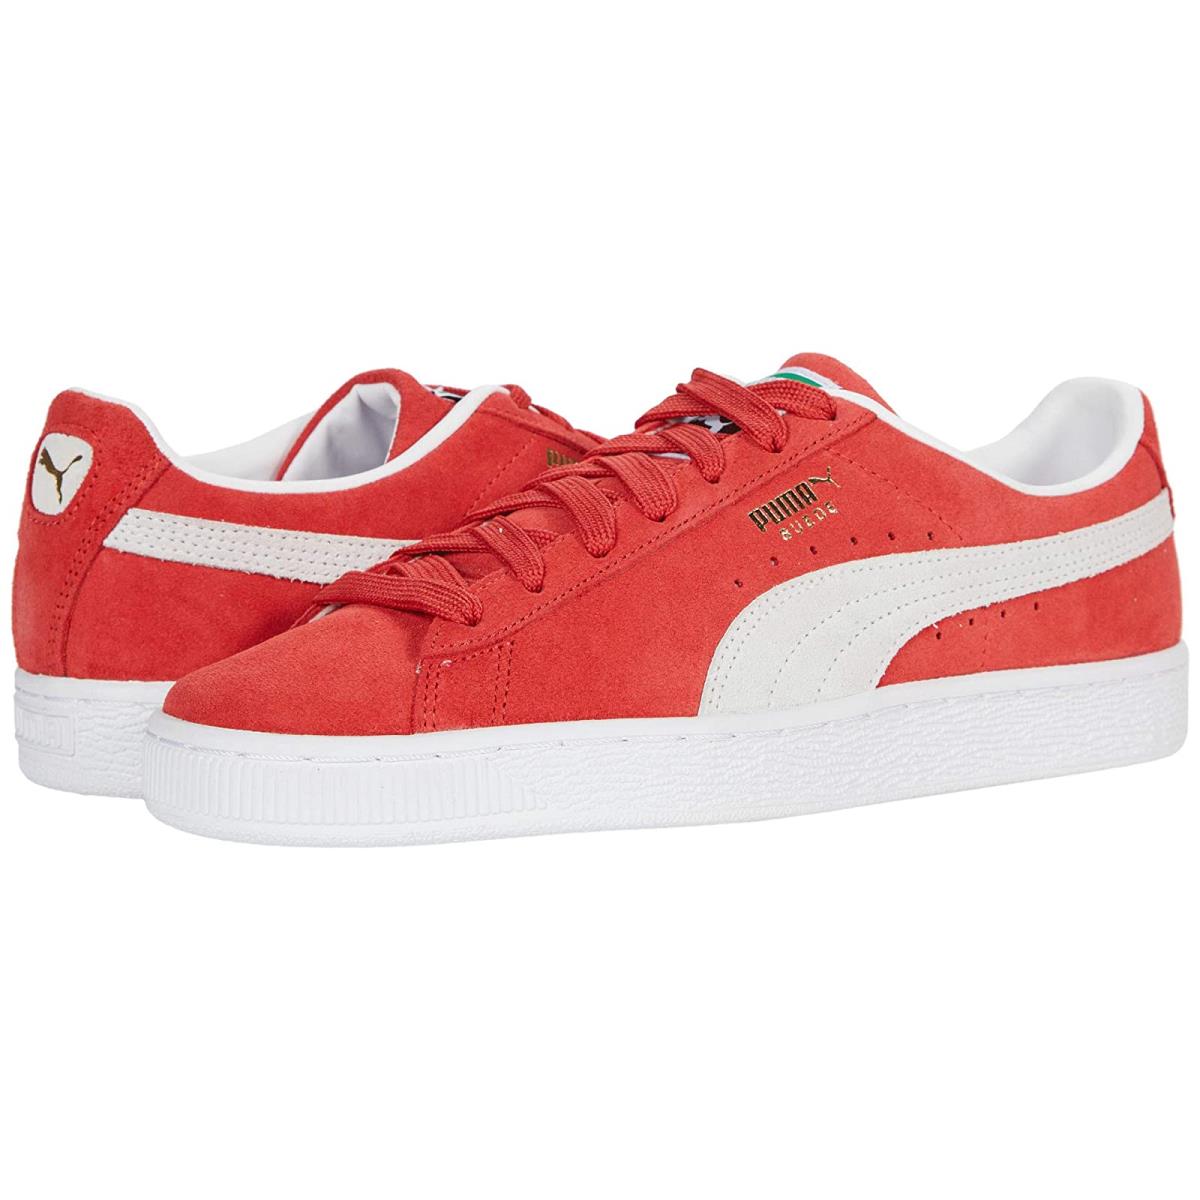 Woman`s Sneakers Athletic Shoes Puma Suede Classic Xxi High Risk Red/Puma White